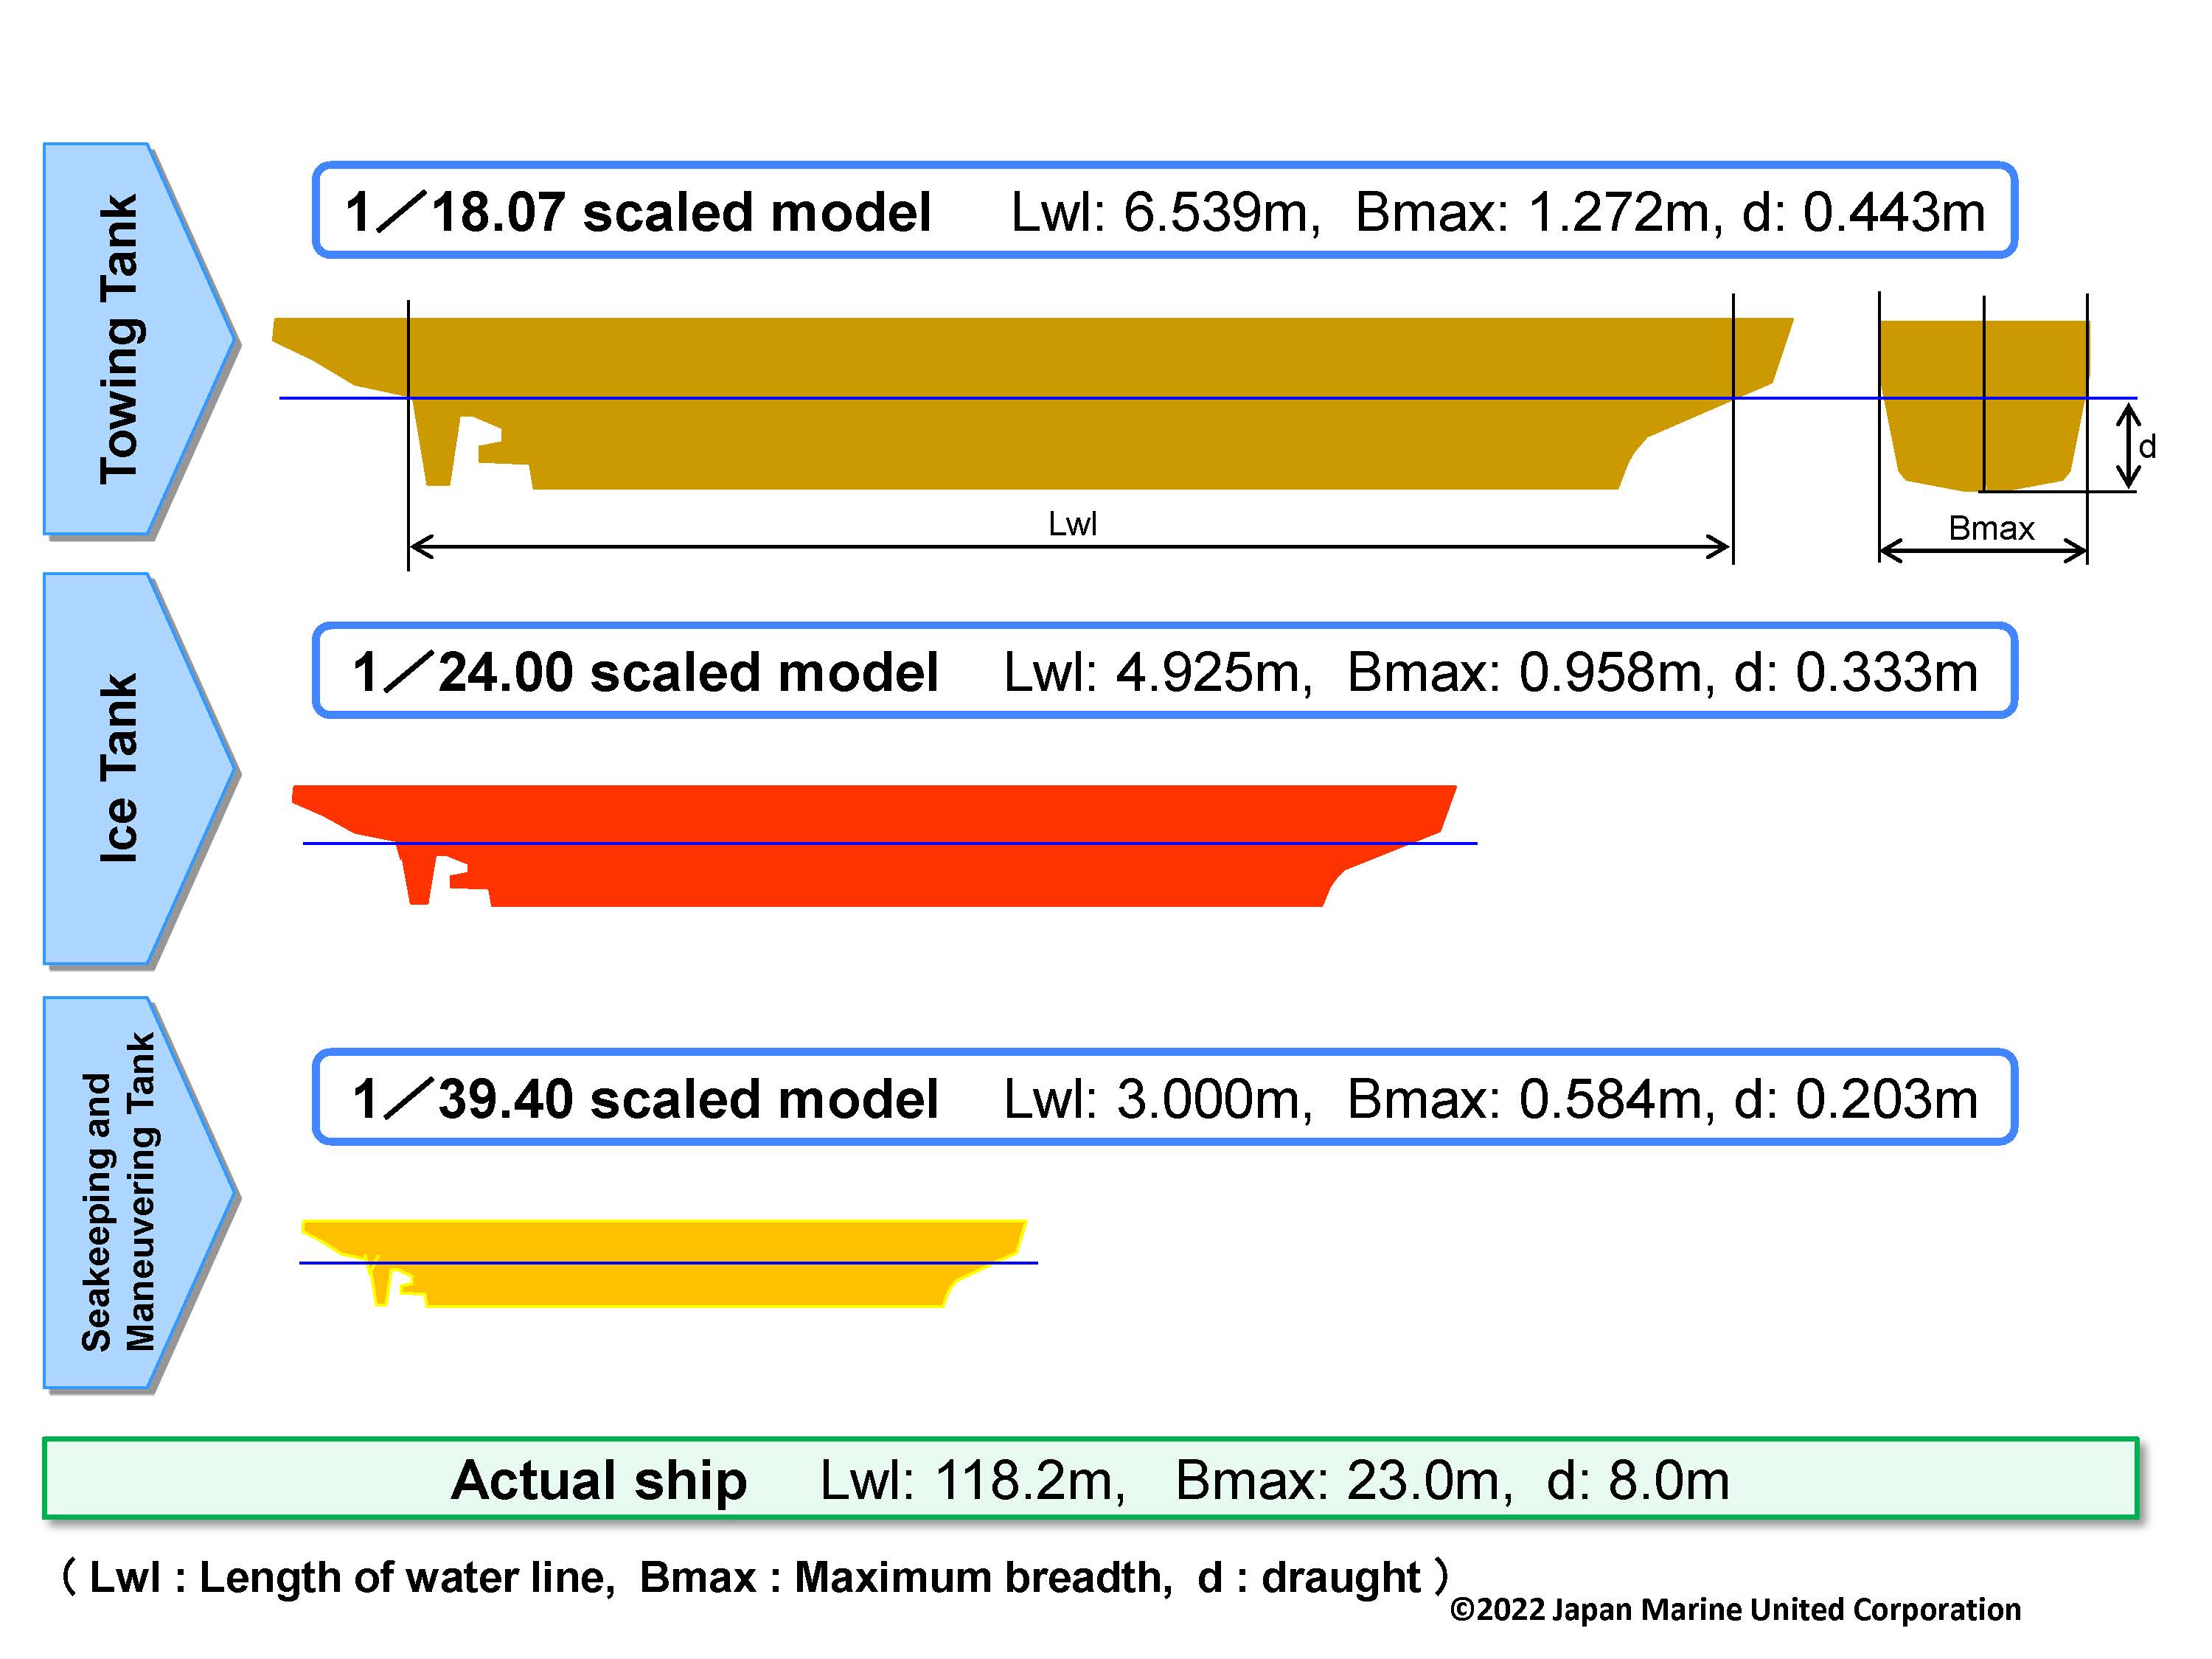 ＜Figure 2 : The scale of the model ship＞